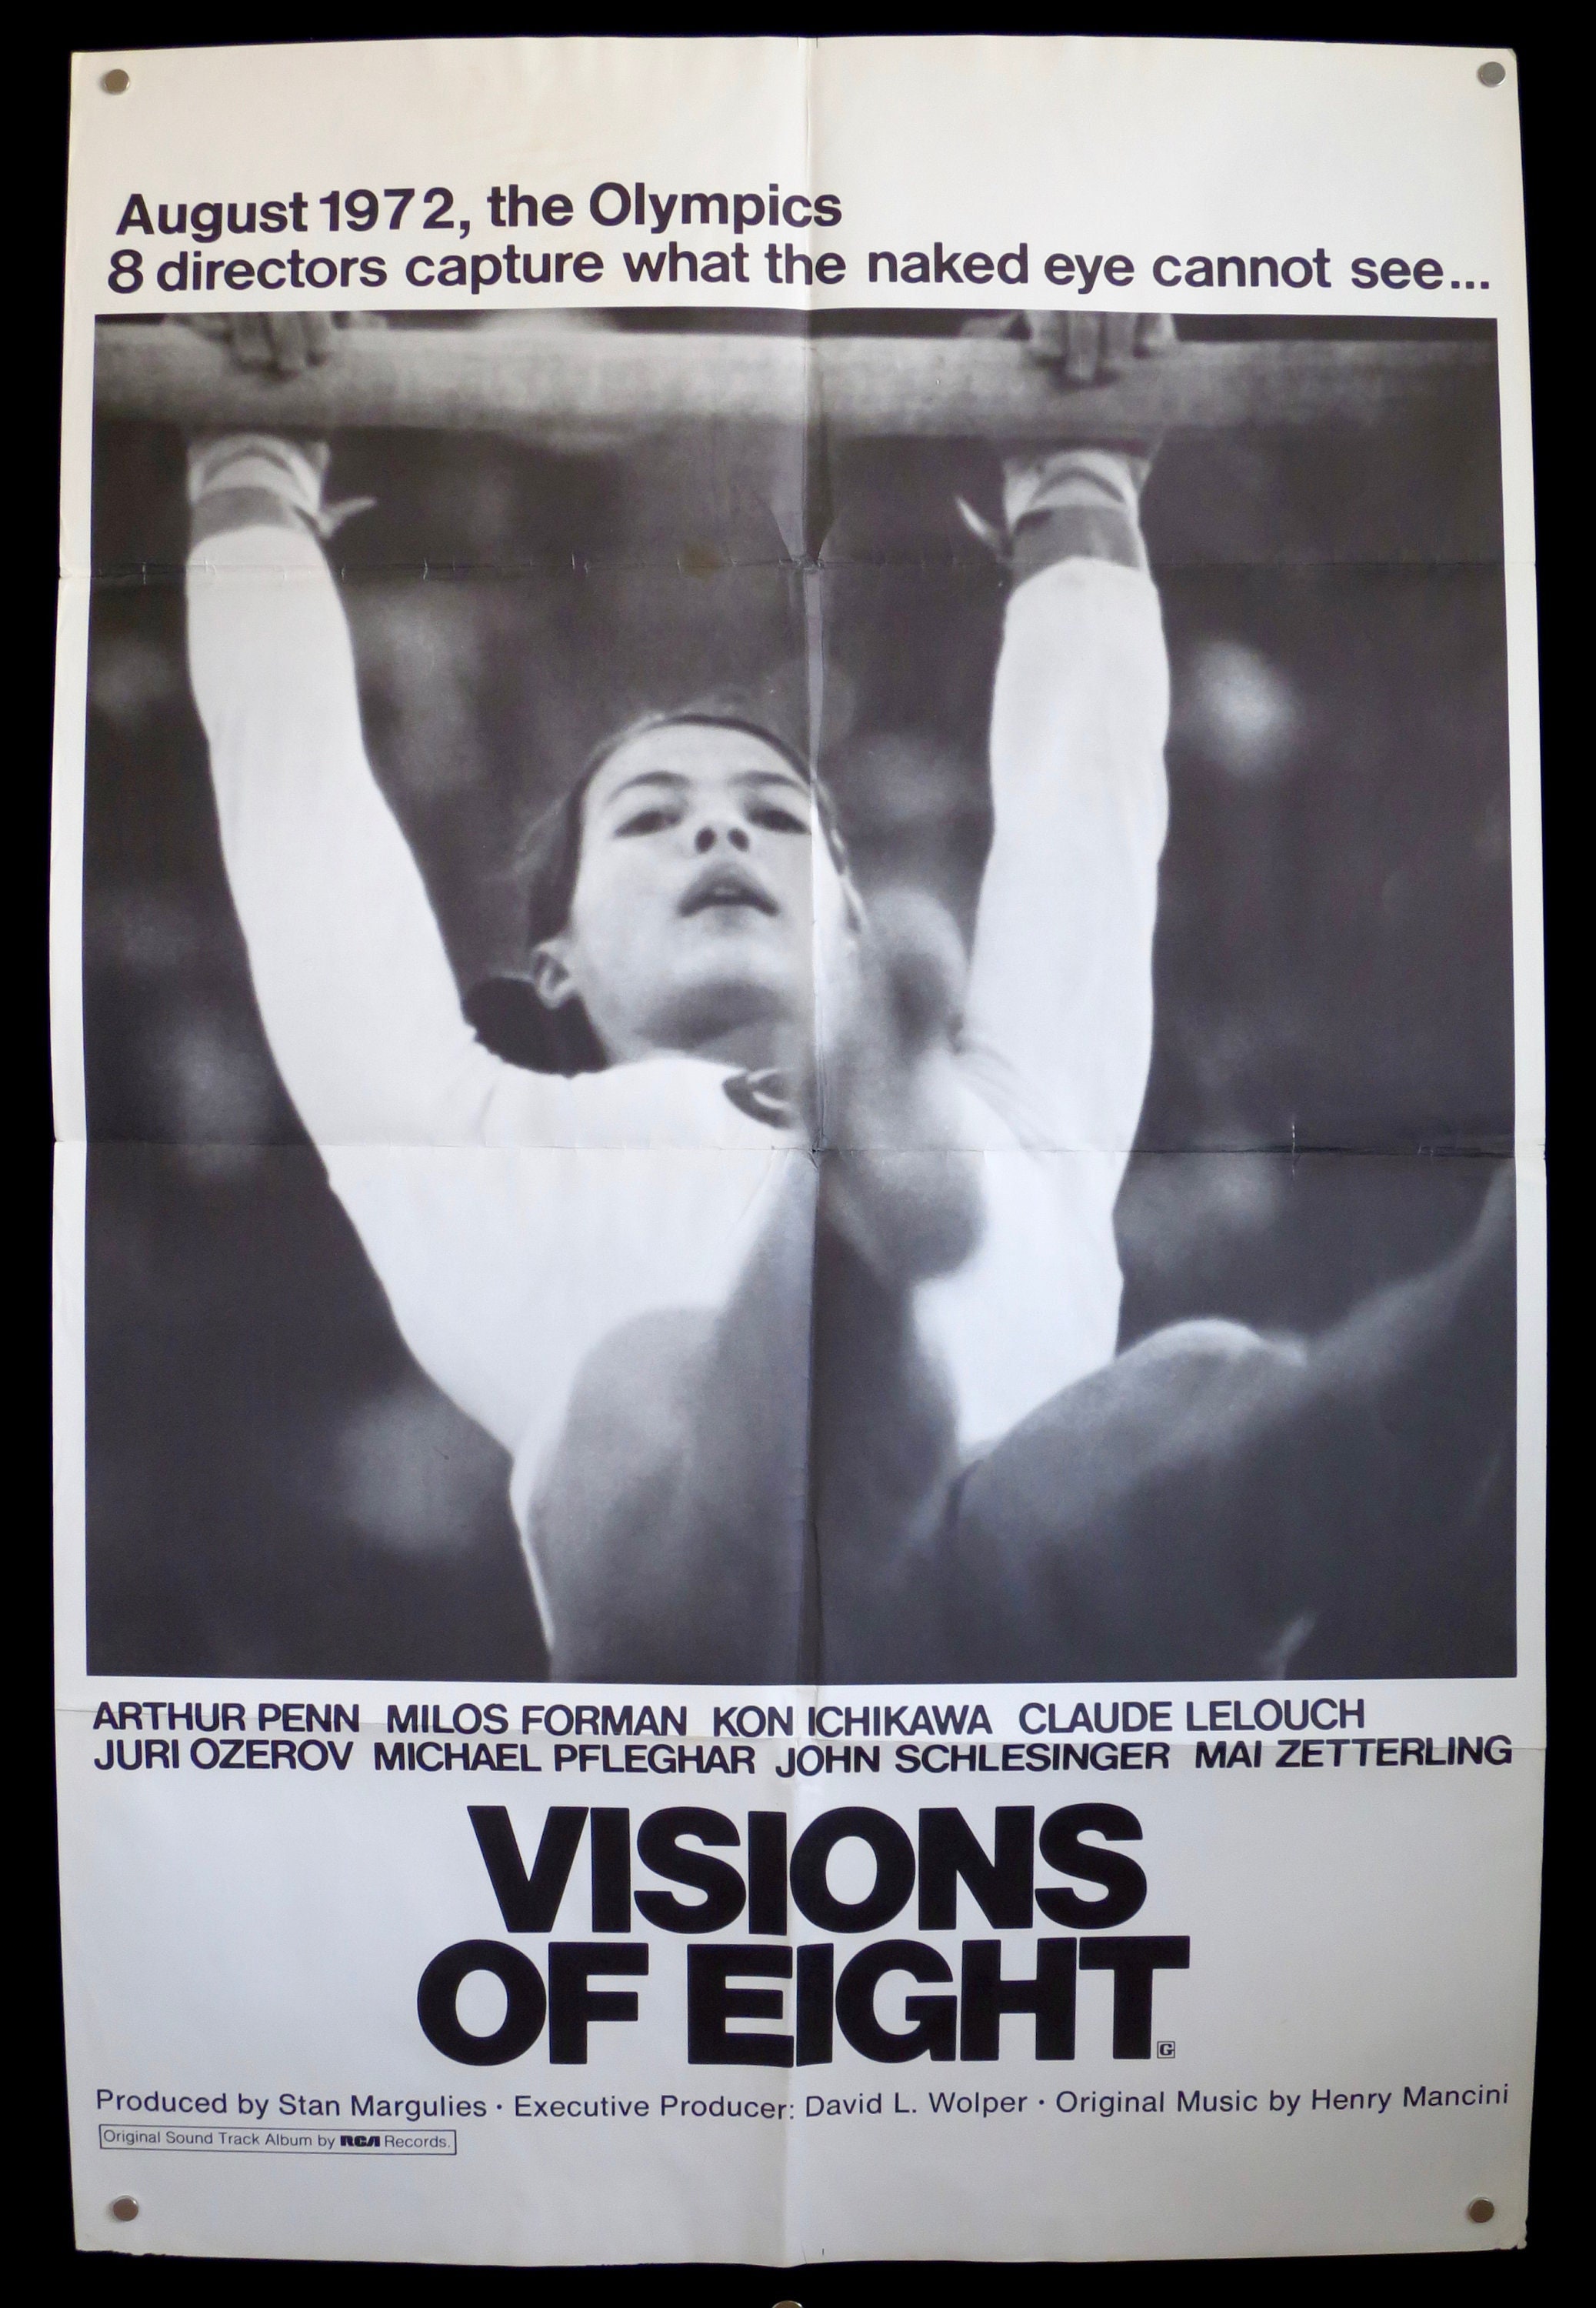 VISIONS OF EIGHT - Rare Movie Poster - Orig 1 Sheet 1973 in Good Condition - 8 International Directors Documentary on '72 Olympics!